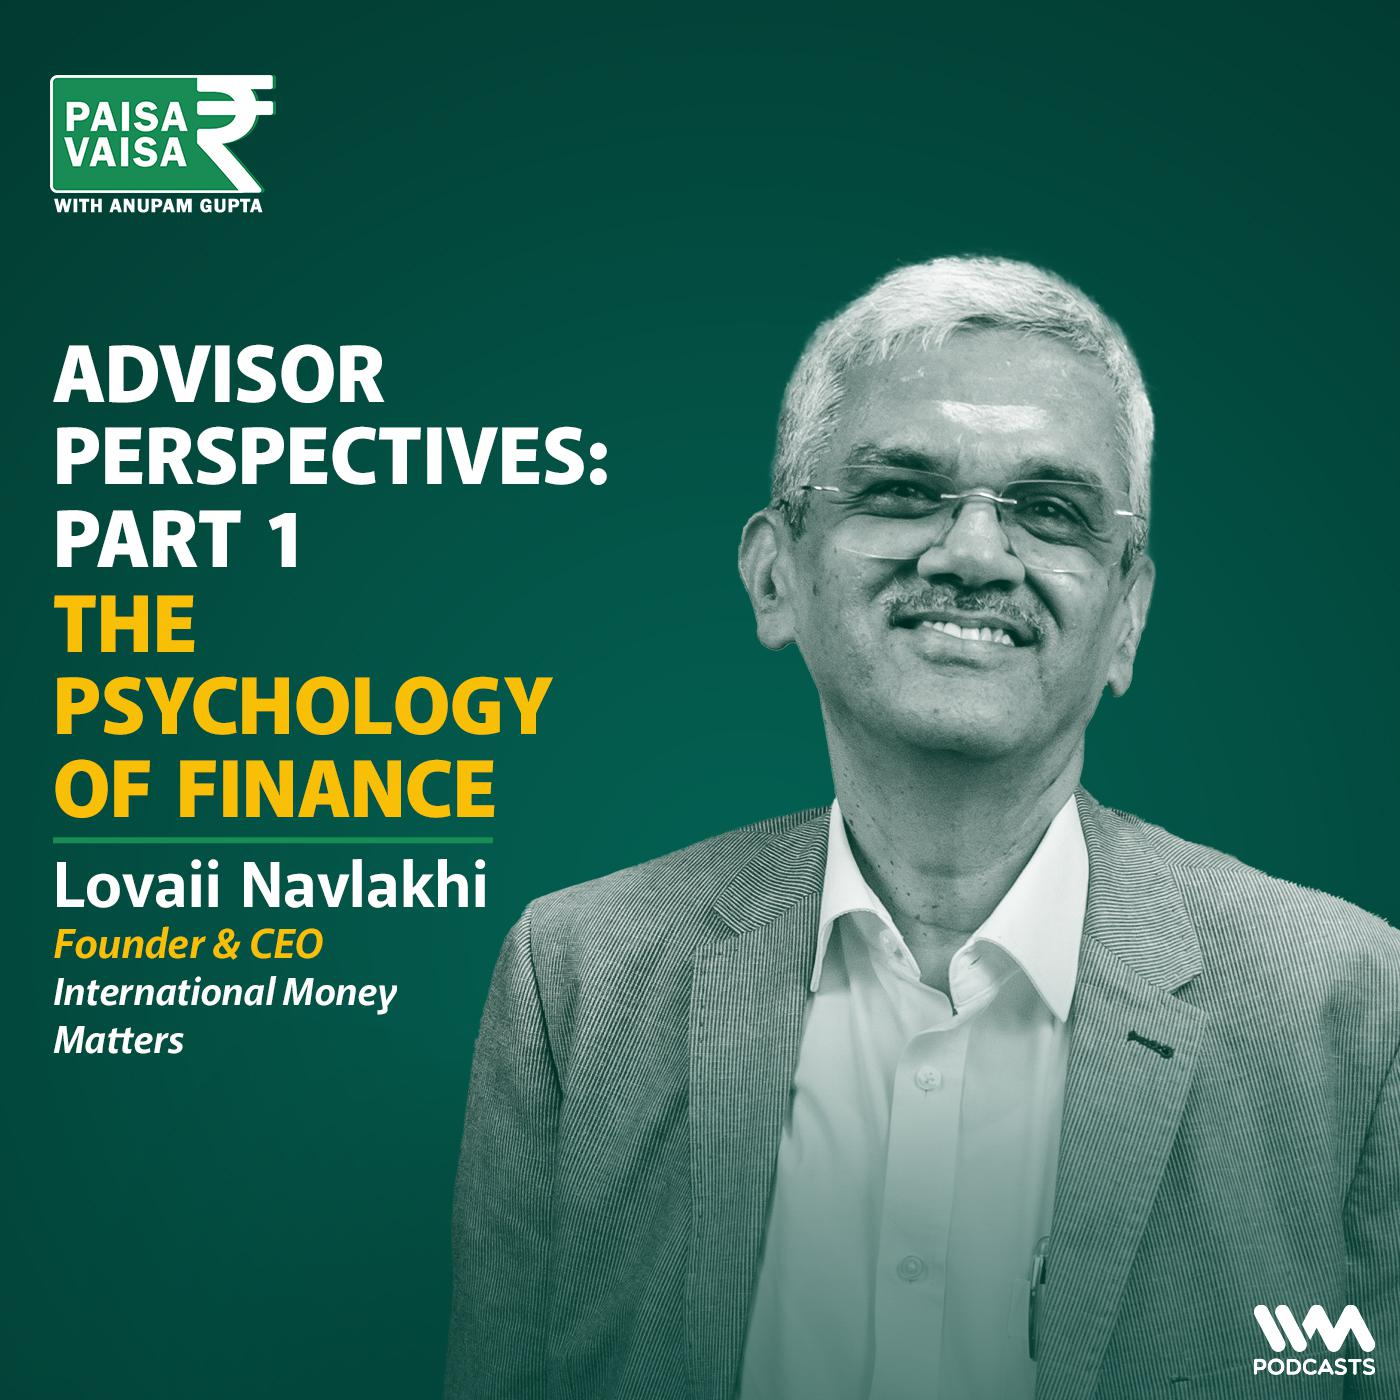 Advisor Perspectives Part 1 : The Psychology of Finance with International Money Matters